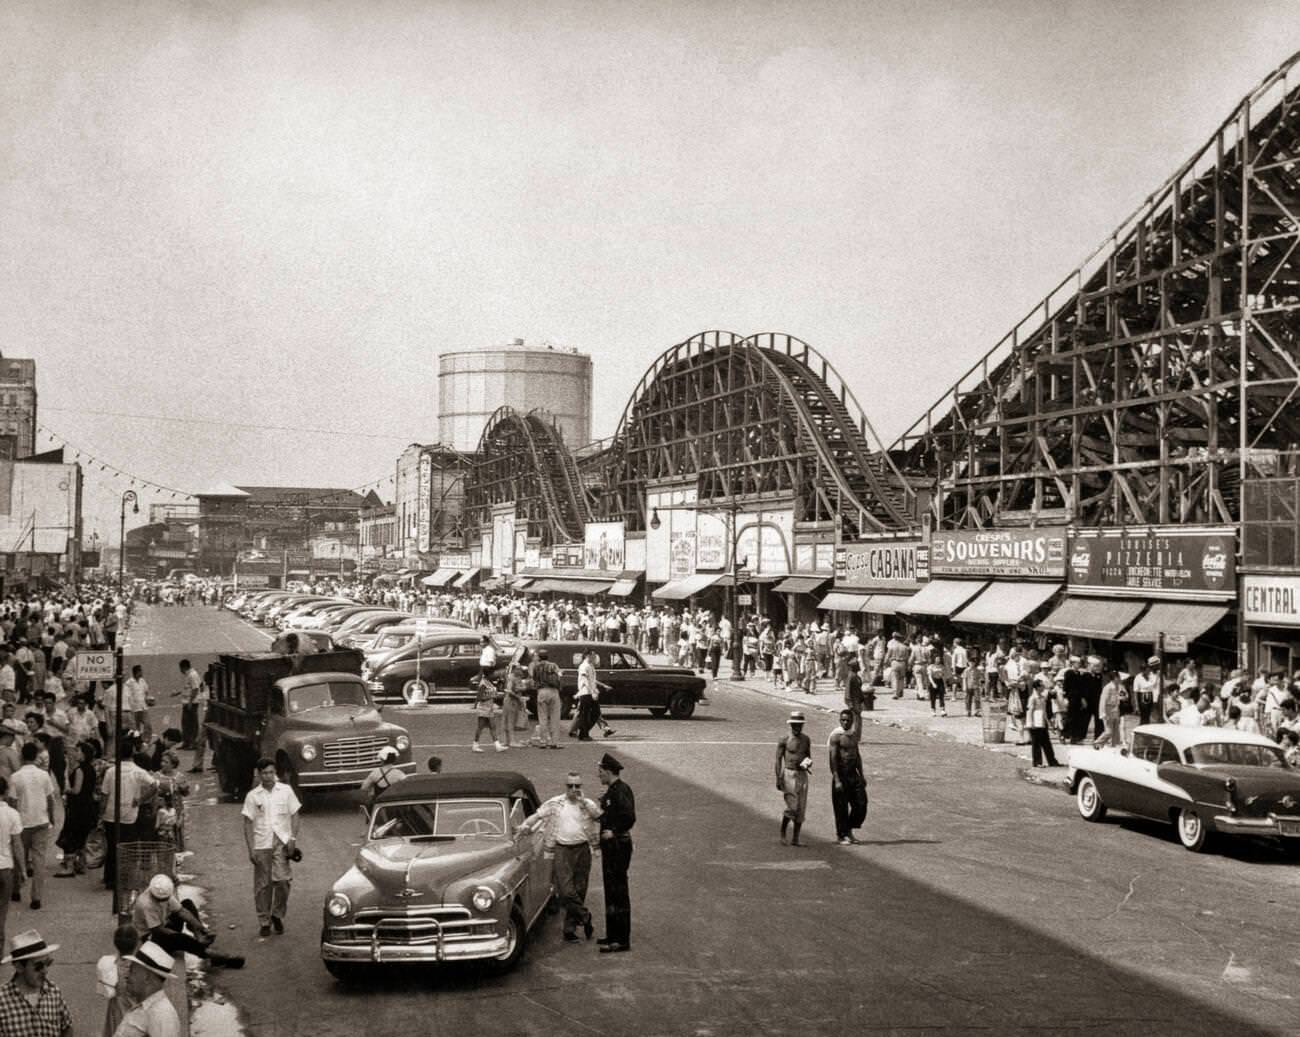 Crowded Streets And Parked Cars At Coney Island, 1950S.